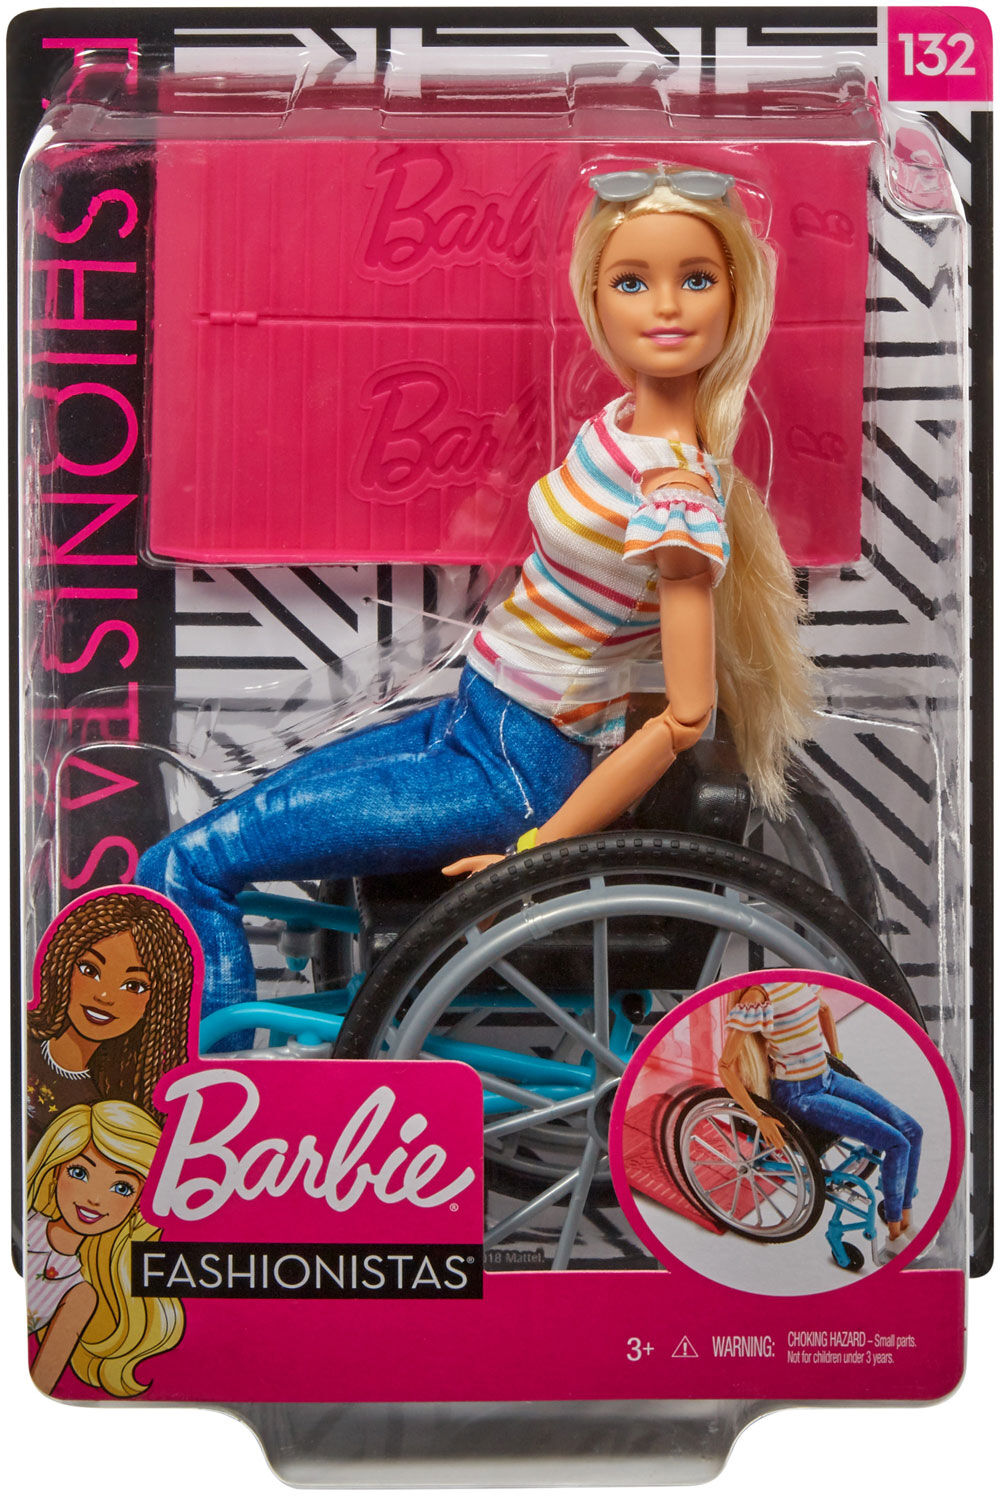 made to move barbie toys r us